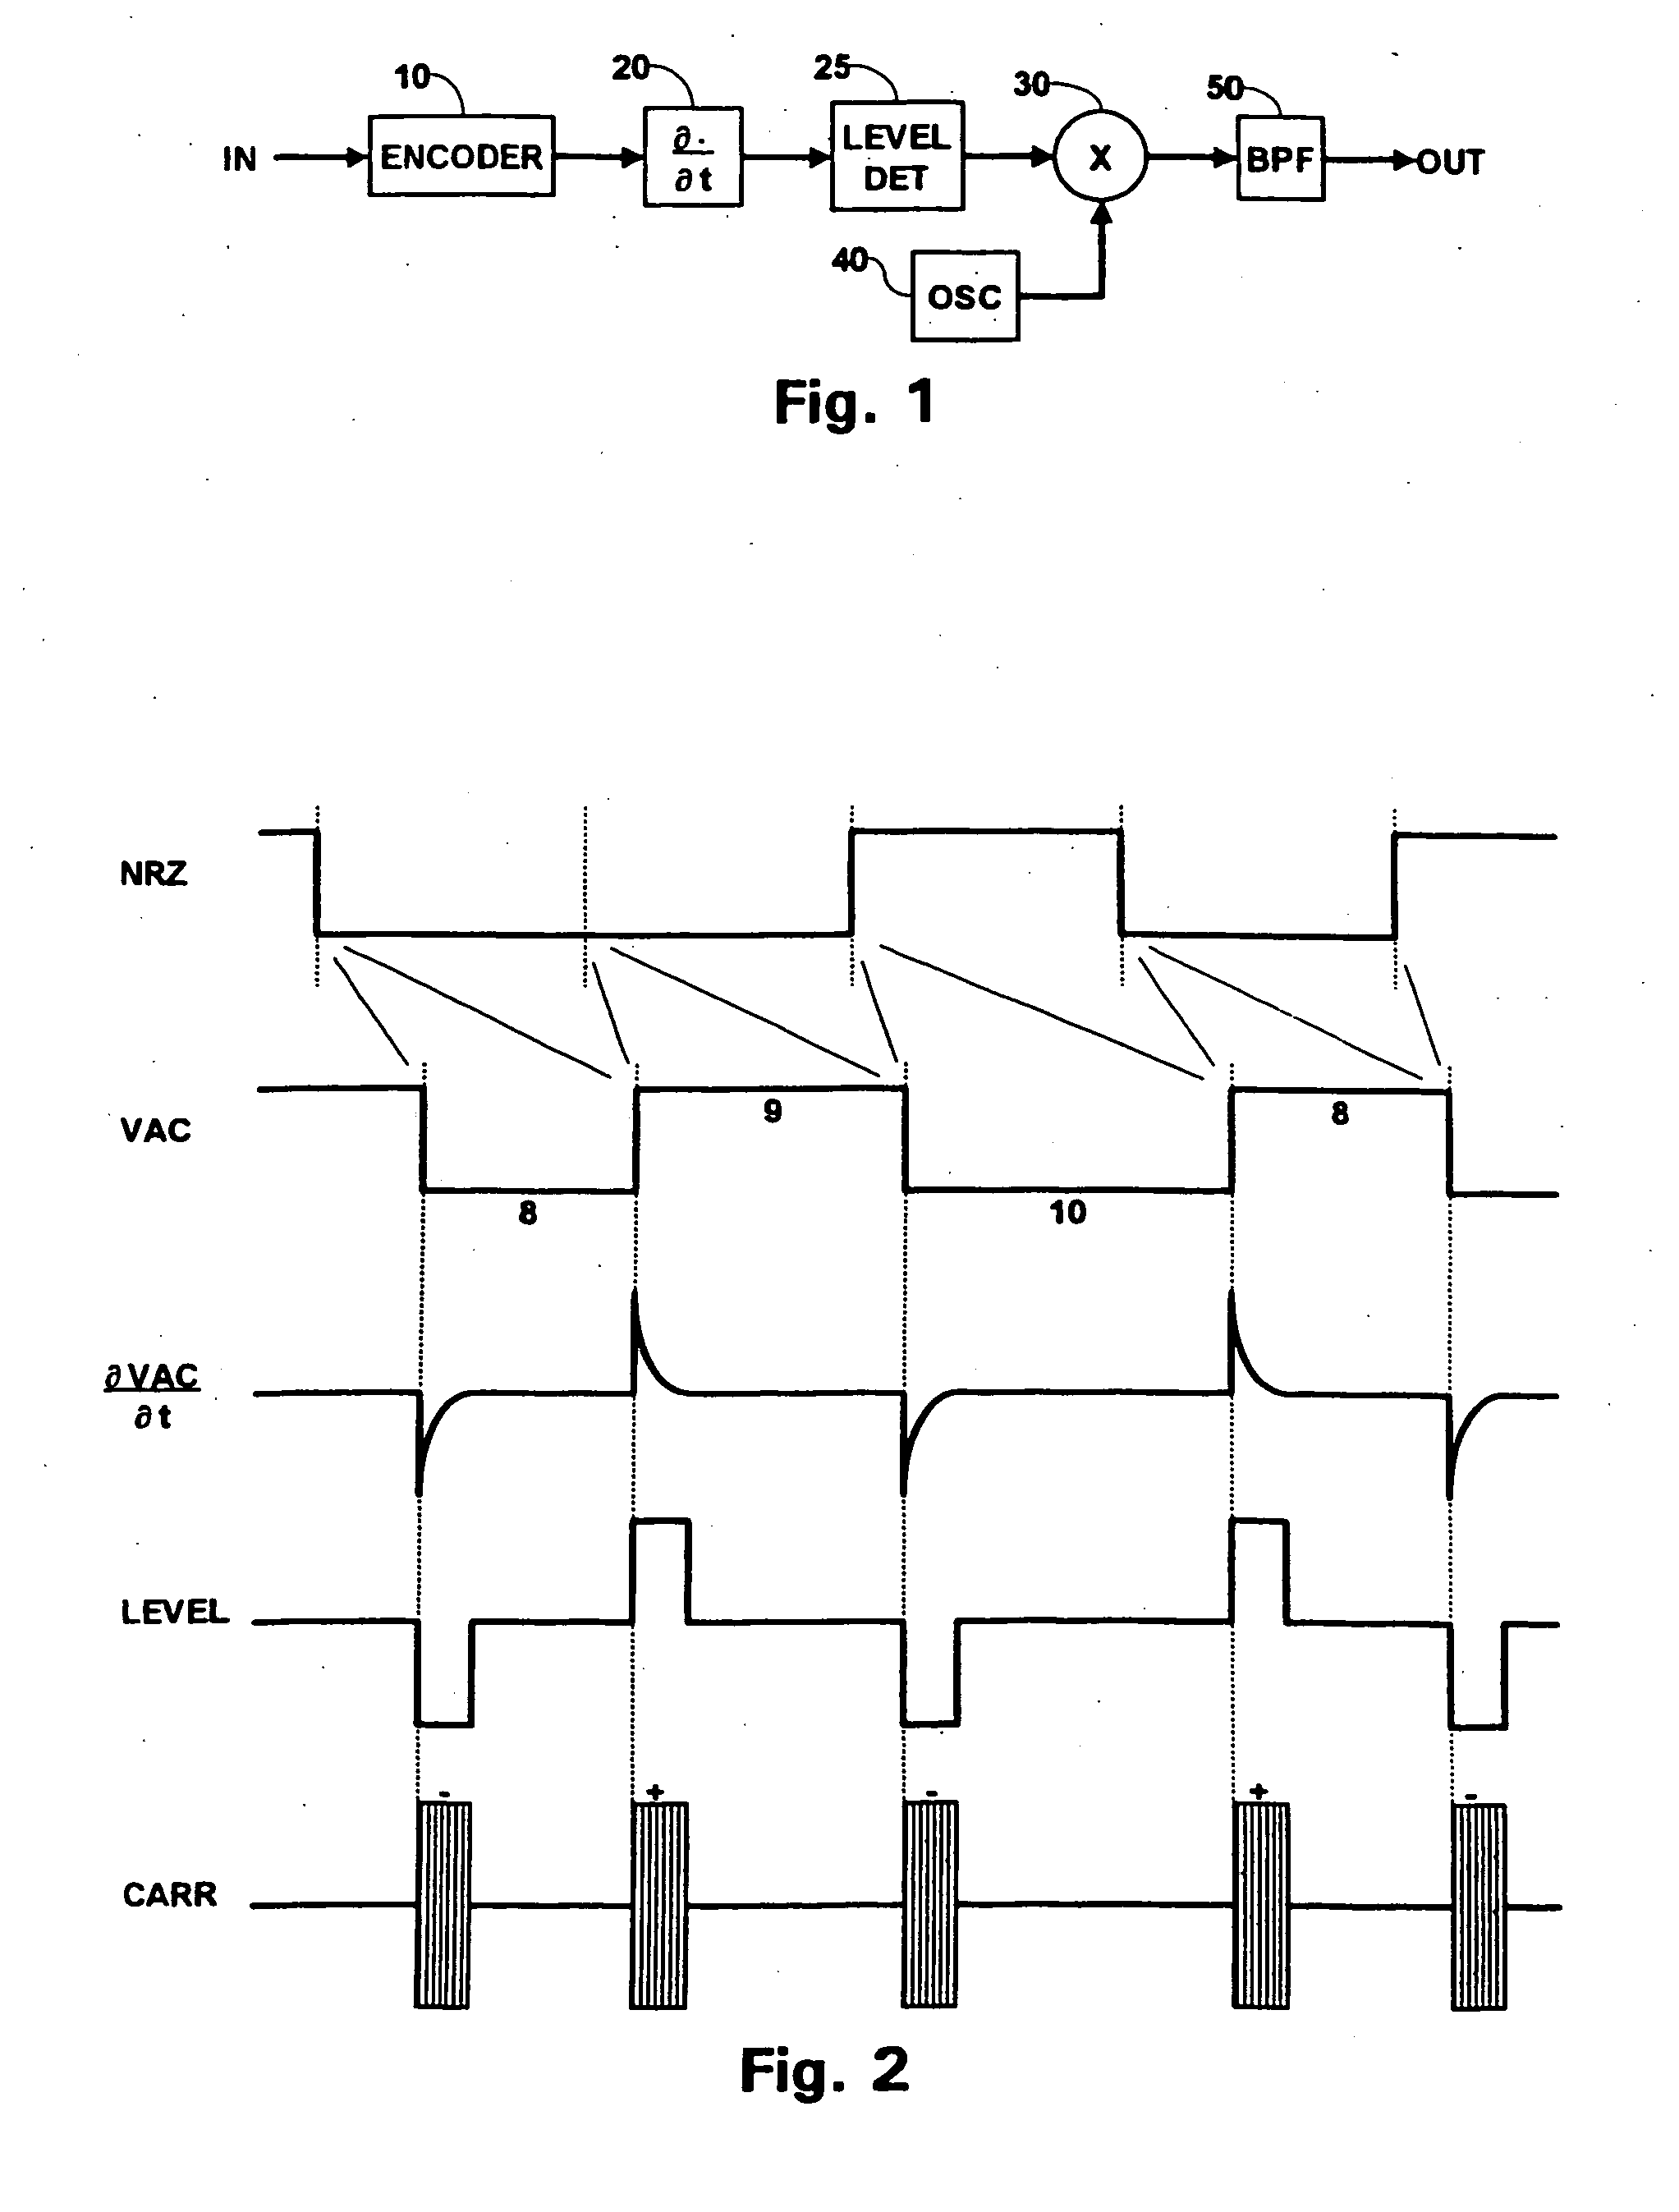 In-band-on-channel broadcast system for digital data